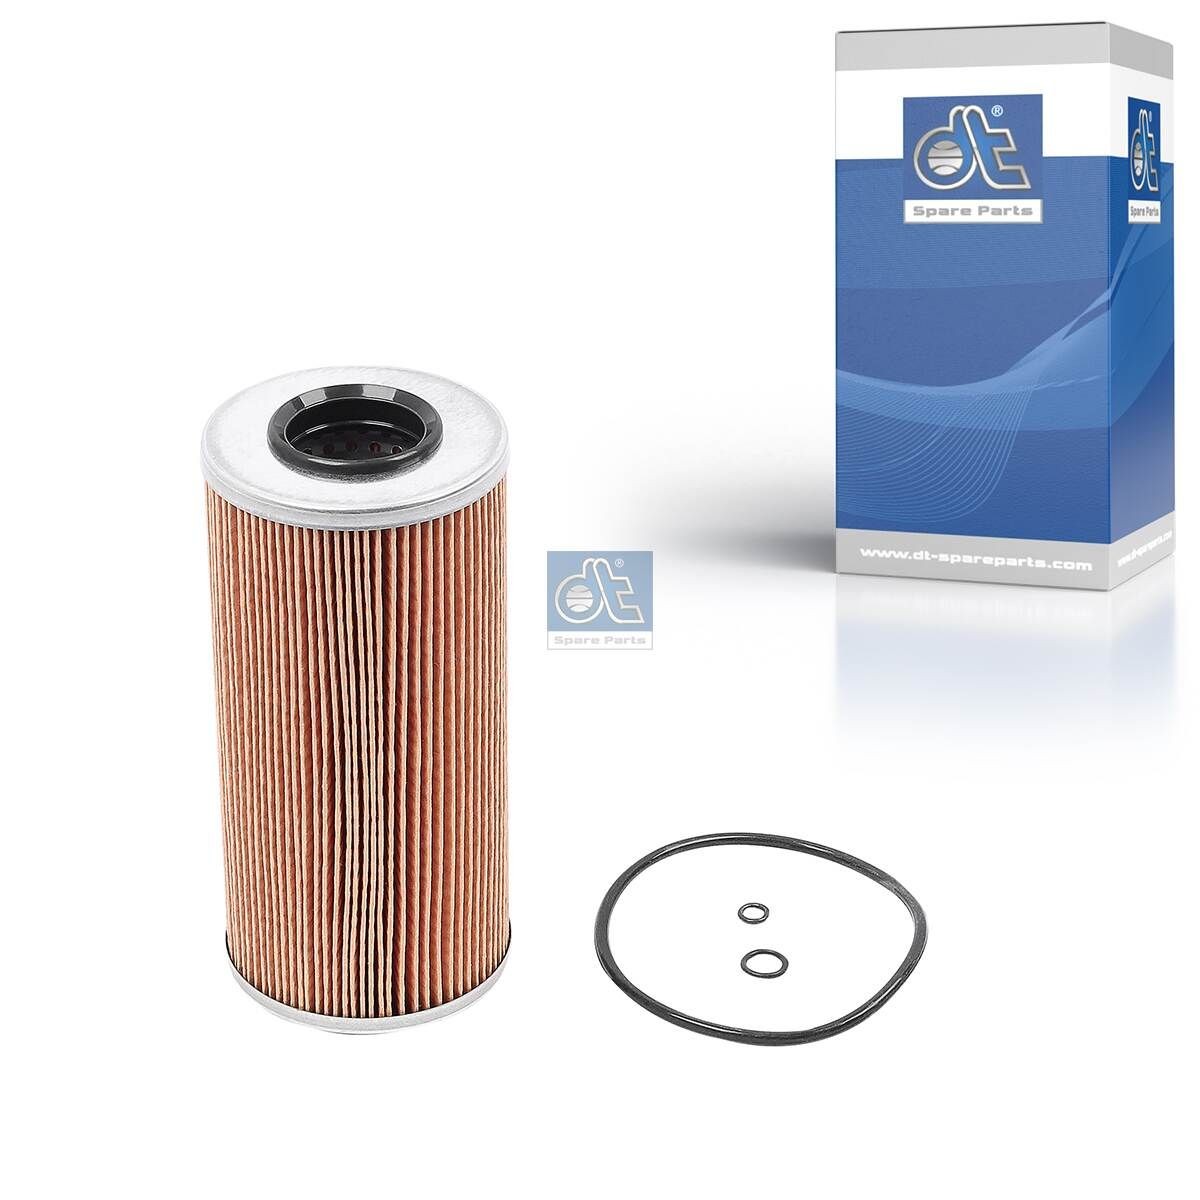 HU 951 x DT Spare Parts 3.14108 Oil filter A 606 180 0009